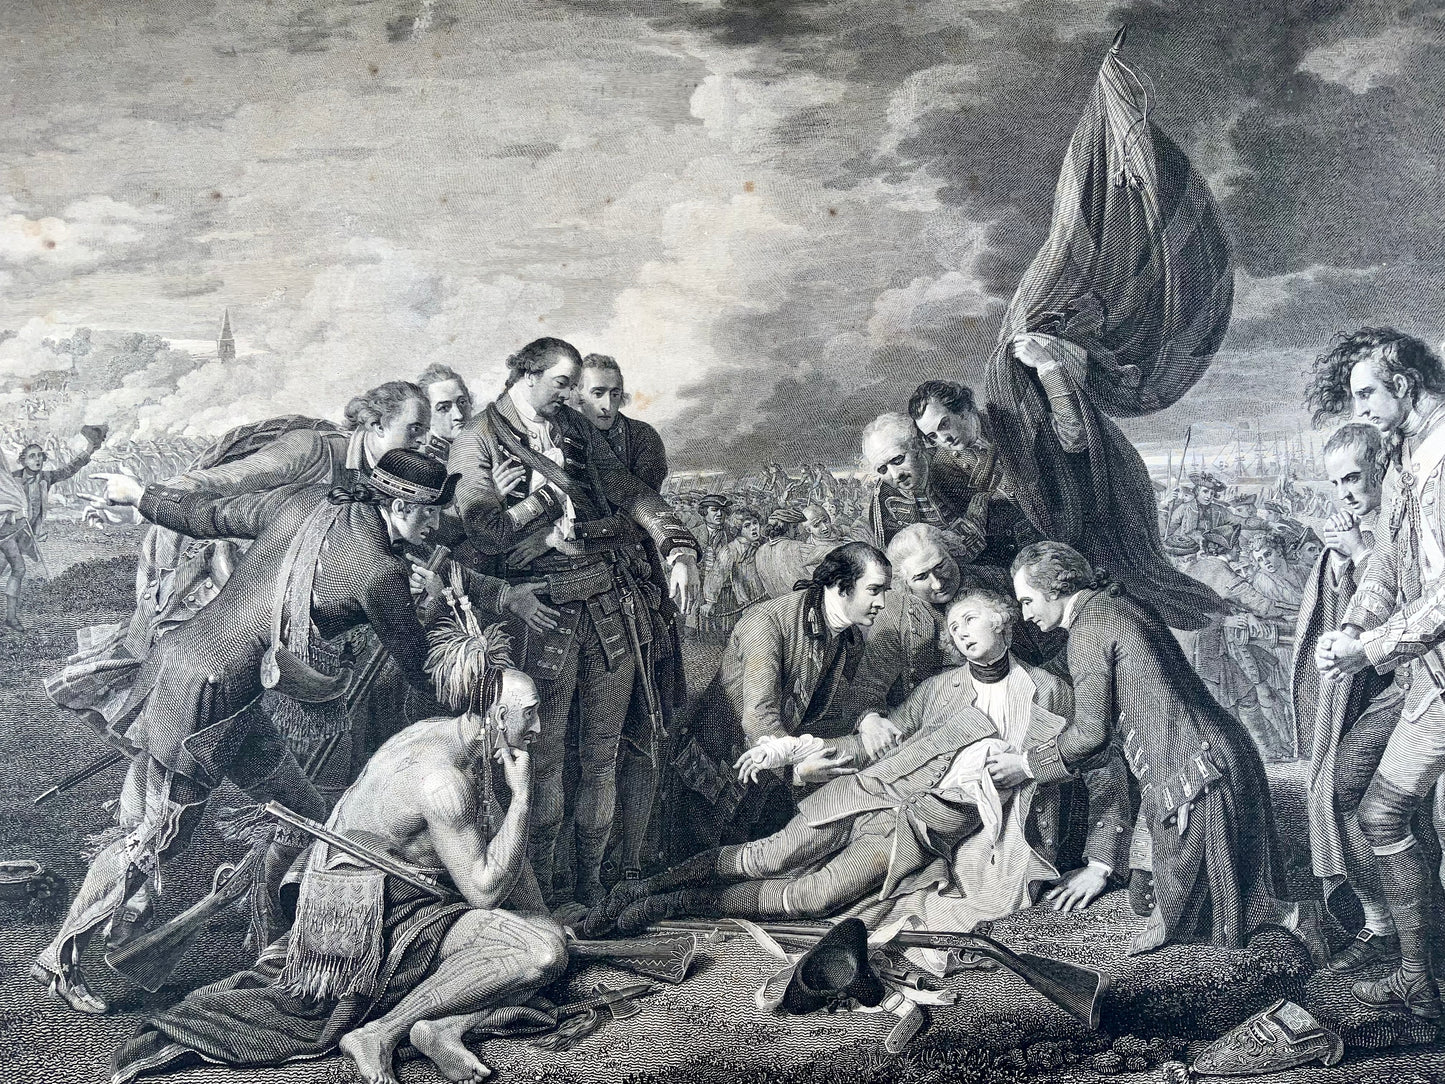 1789 "The Death of General Wolfe", etching after Benjamin West, laid on vellum - Classical art, Military